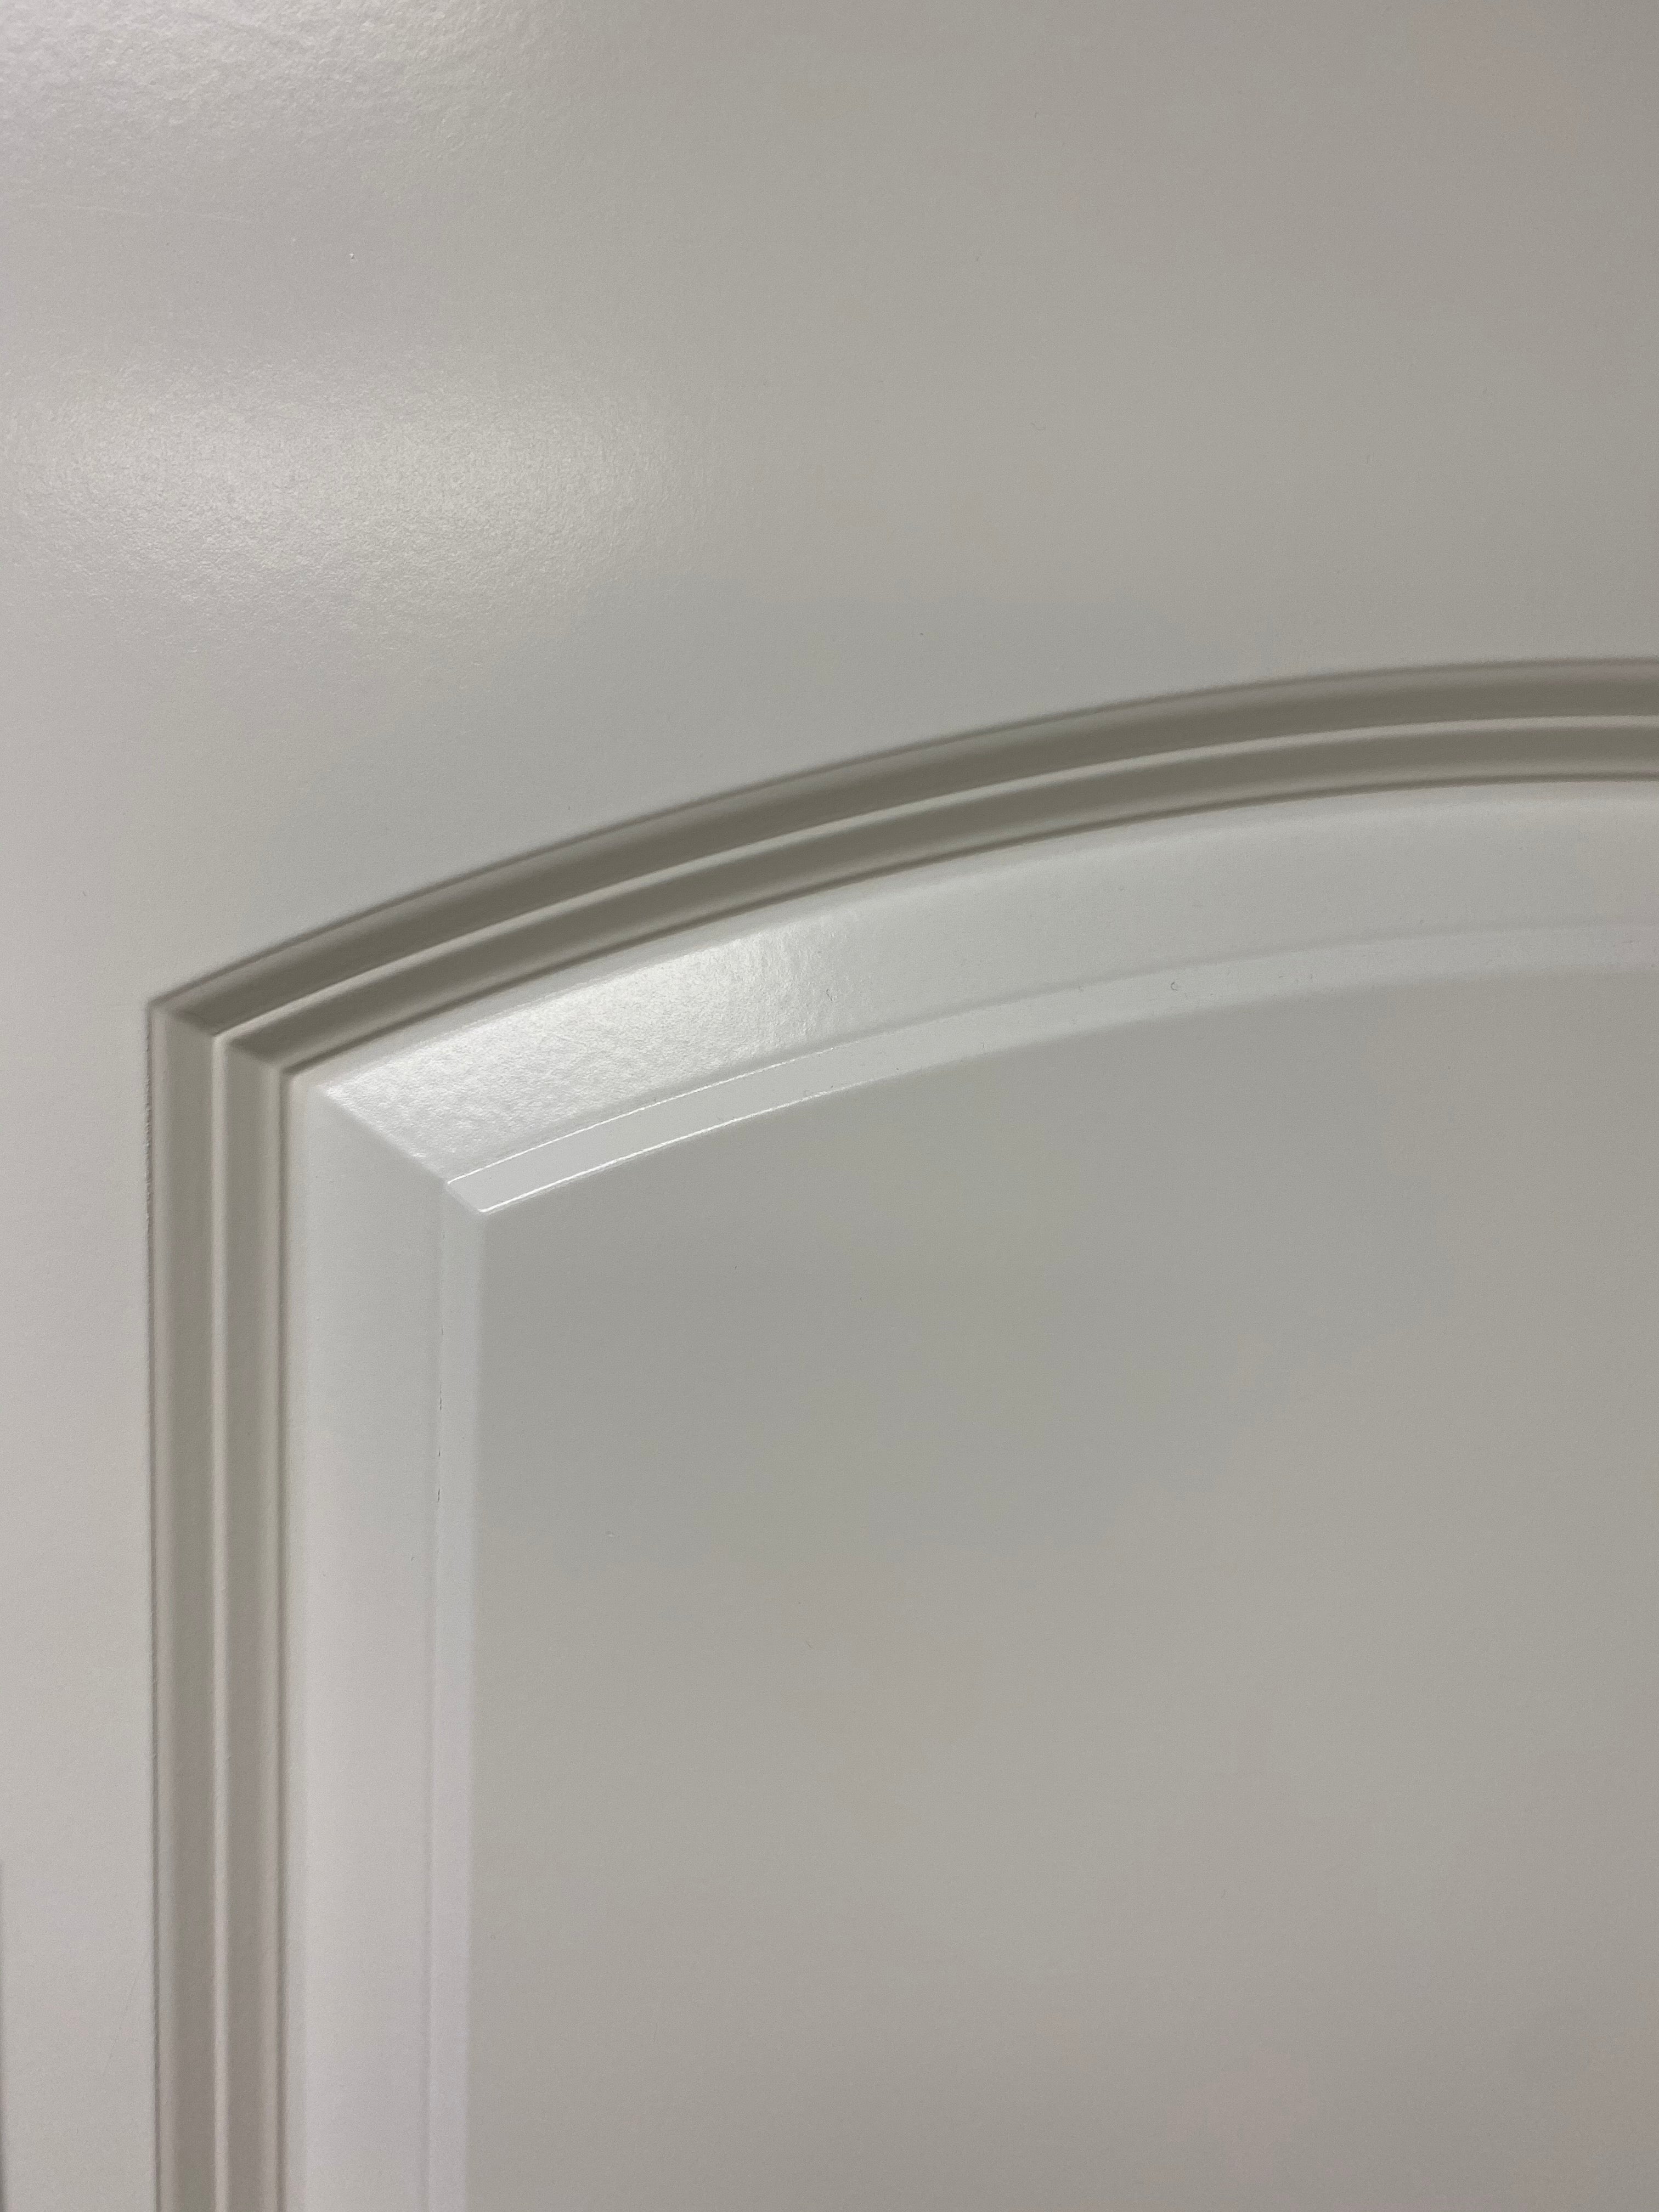 2 Panel Arch Caiman with Louver Insert Primed 6'-8" (80")